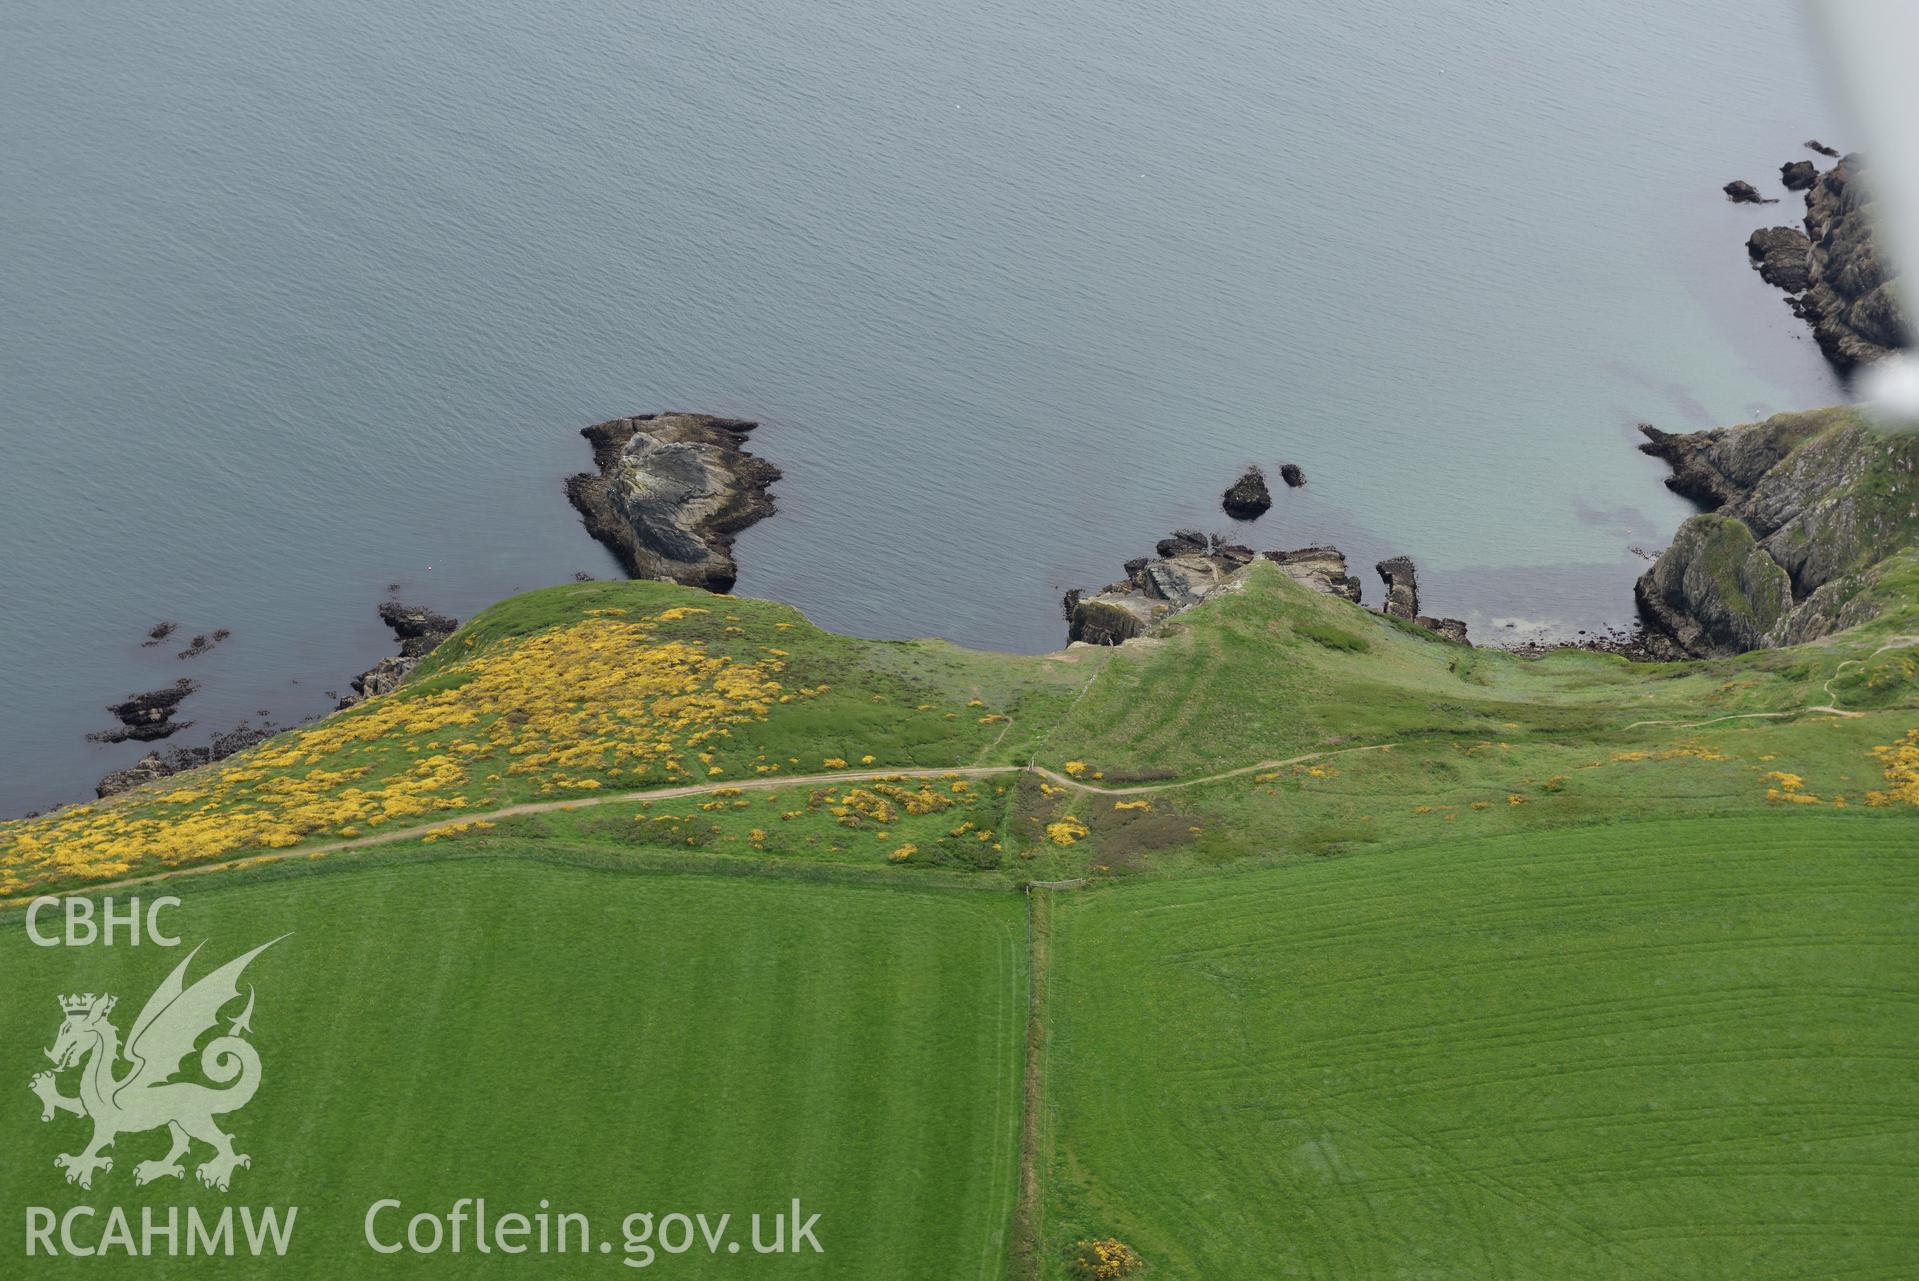 St Elvis, Solva, boundary bank. Baseline aerial reconnaissance survey for the CHERISH Project. ? Crown: CHERISH PROJECT 2017. Produced with EU funds through the Ireland Wales Co-operation Programme 2014-2020. All material made freely available through the Open Government Licence.